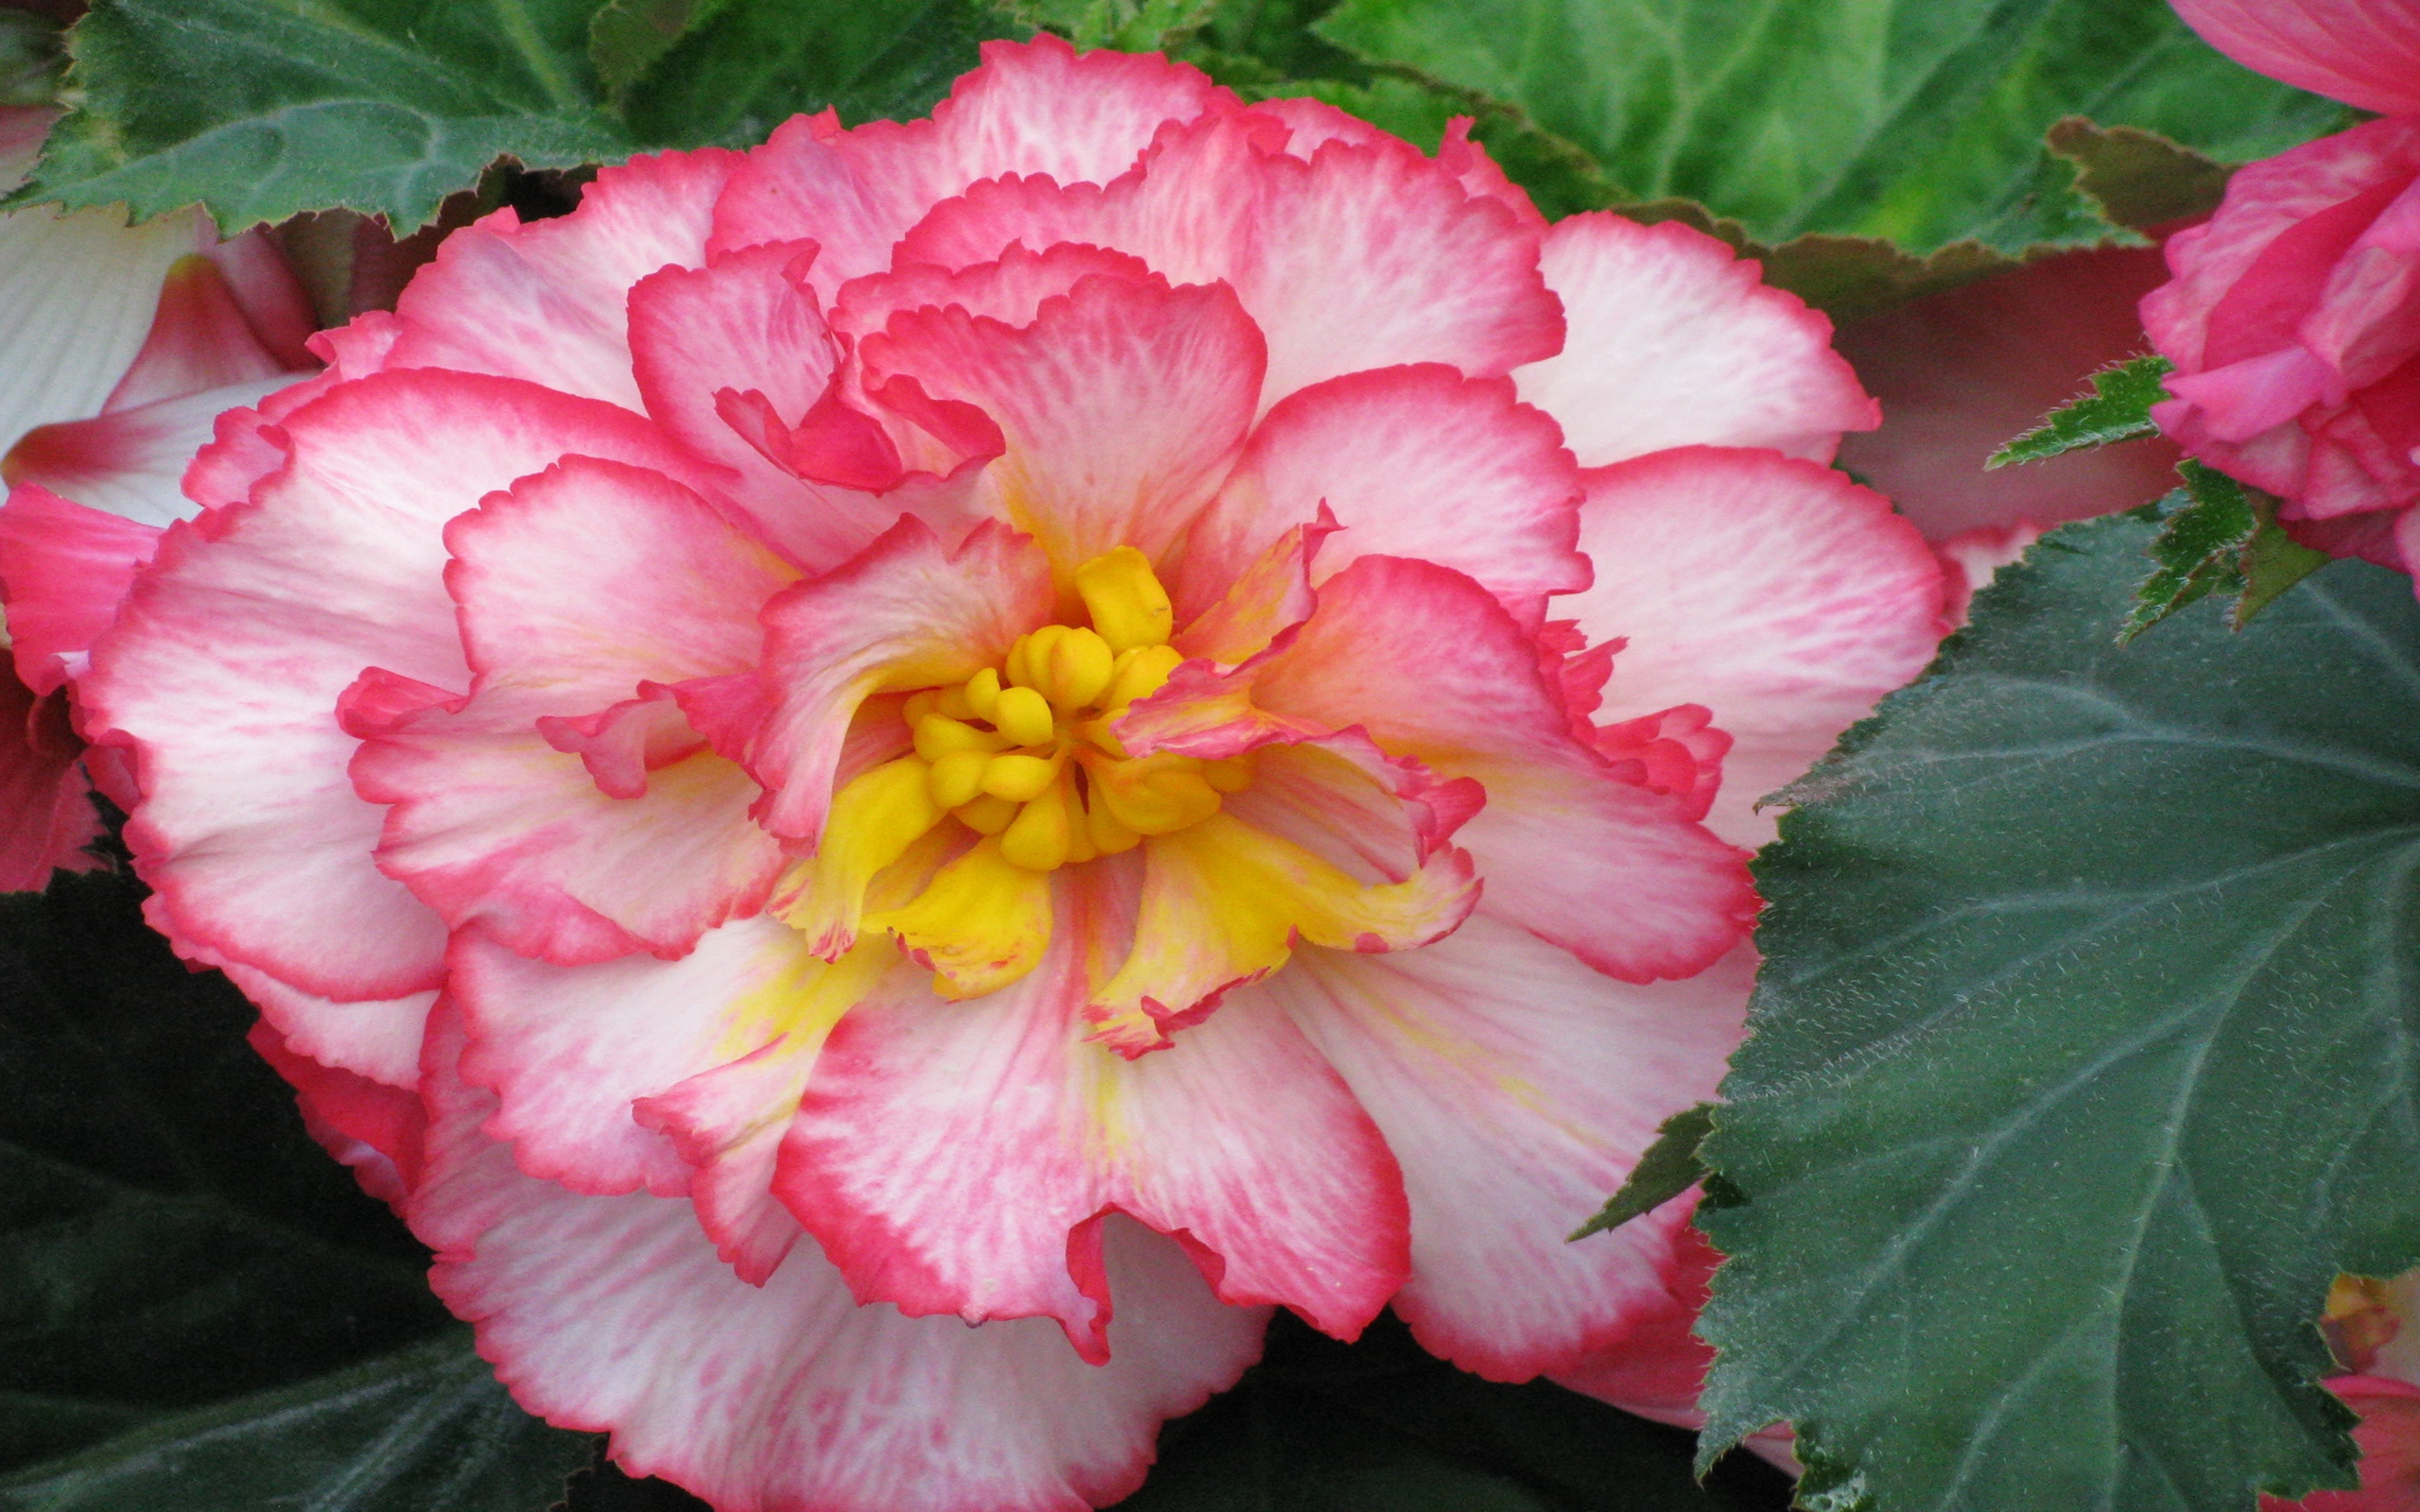 Wallpapers Begonia Pink Color Flowers 54374 : Wallpapers13.com